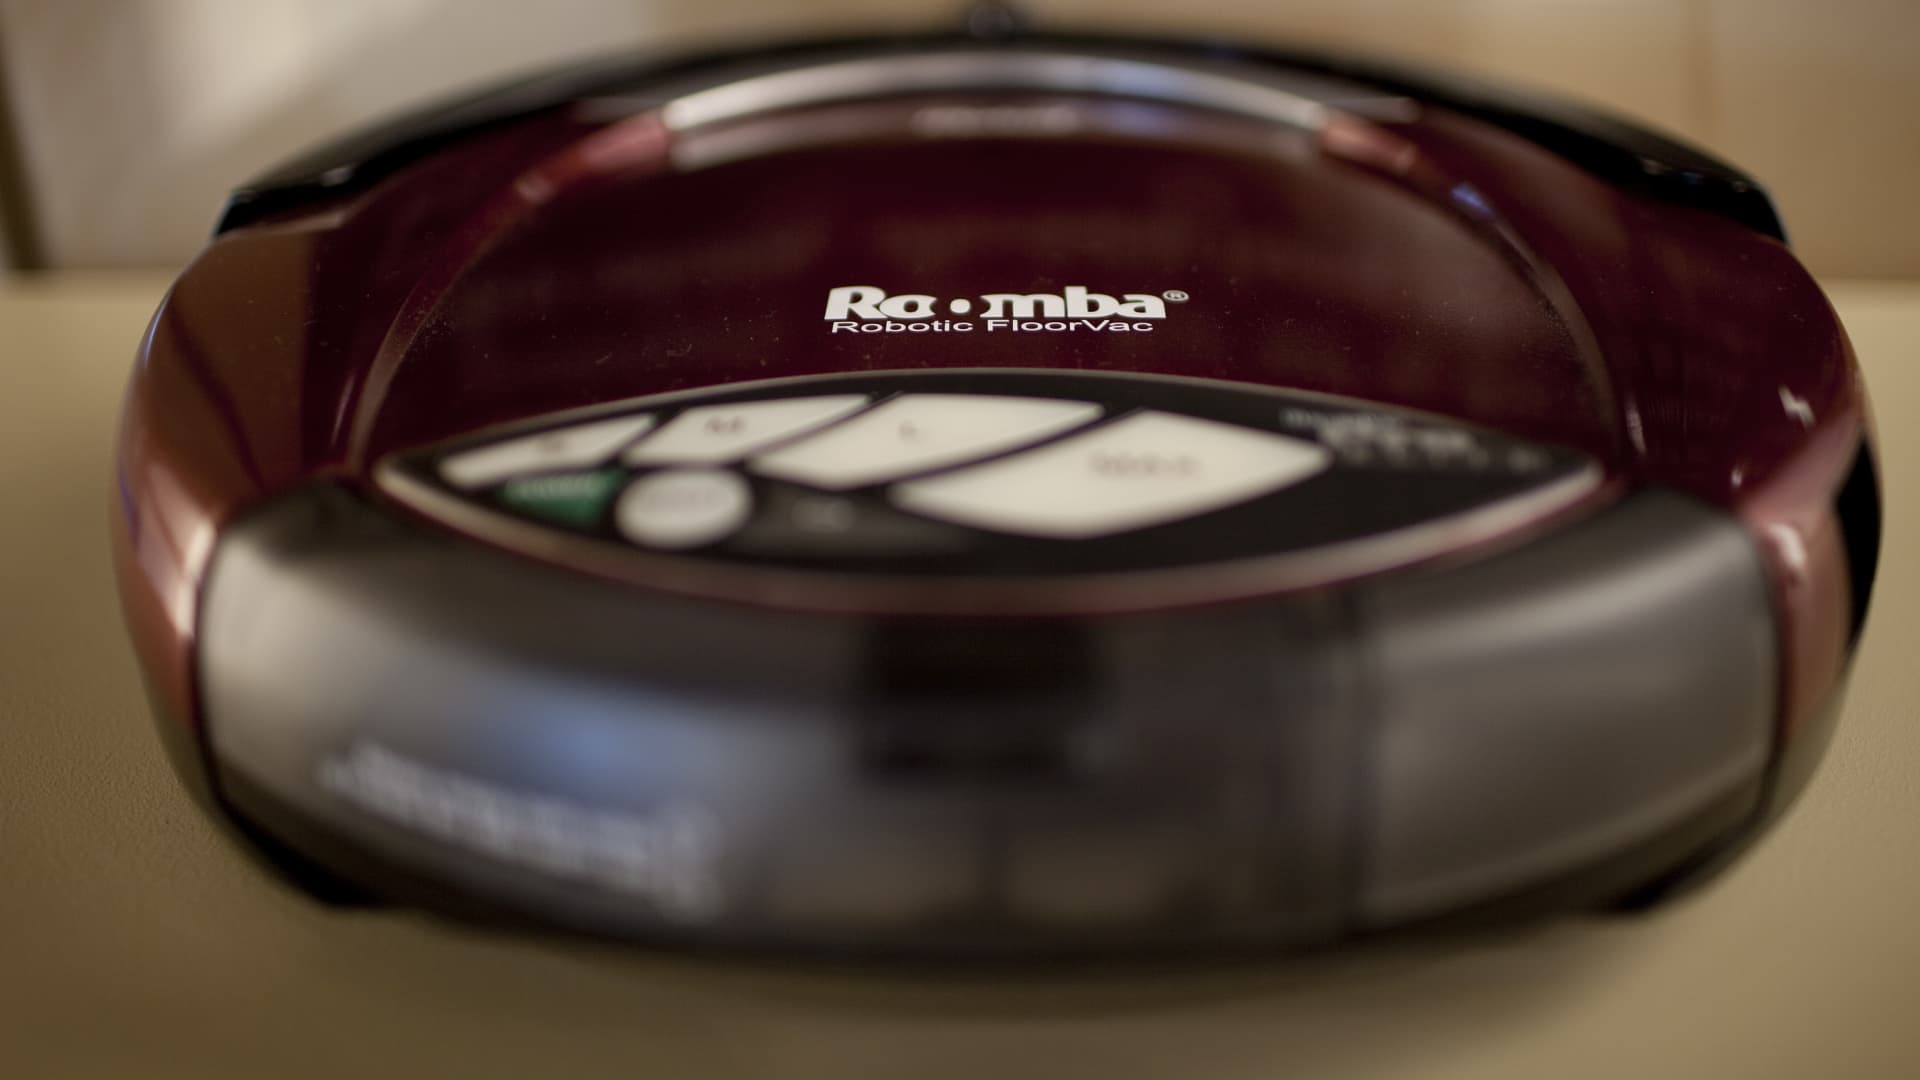 Amazon to acquire maker of Roomba vacuum for roughly $1.7 billion